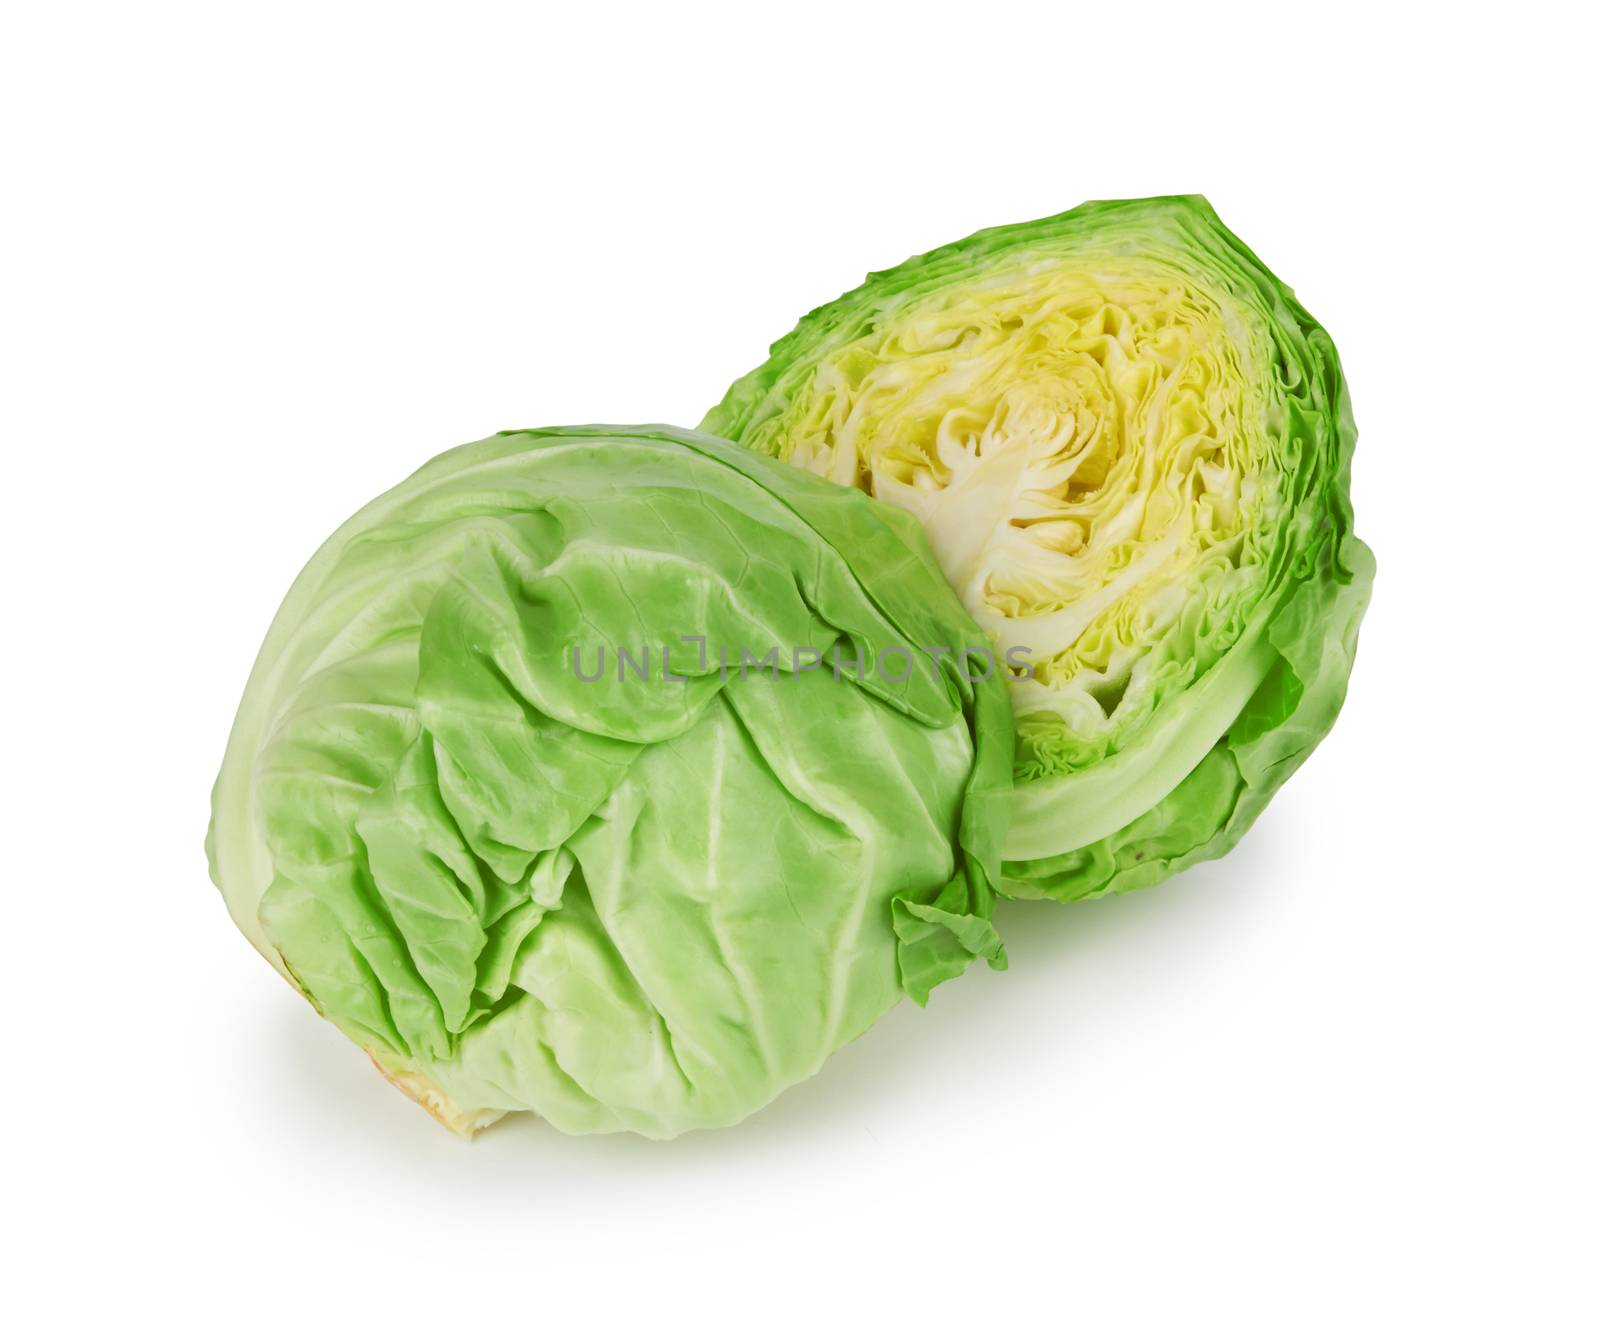 green cabbage on white by pioneer111